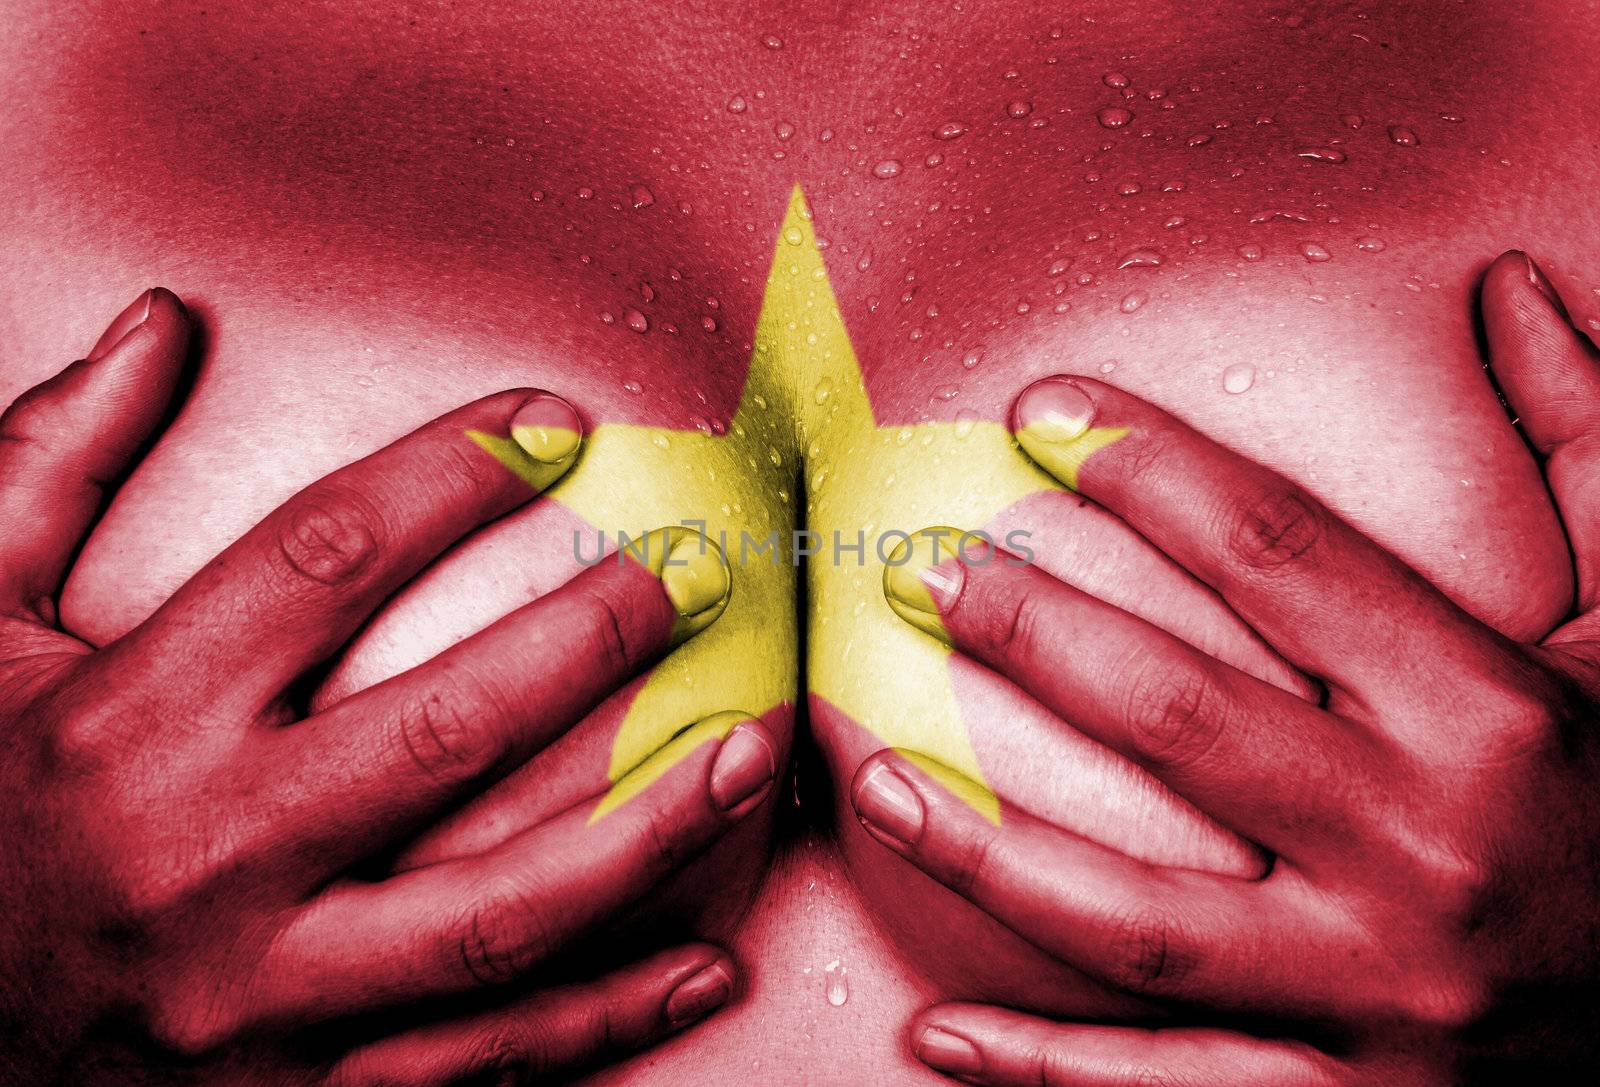 Sweaty upper part of female body, hands covering breasts, flag of Vietnam